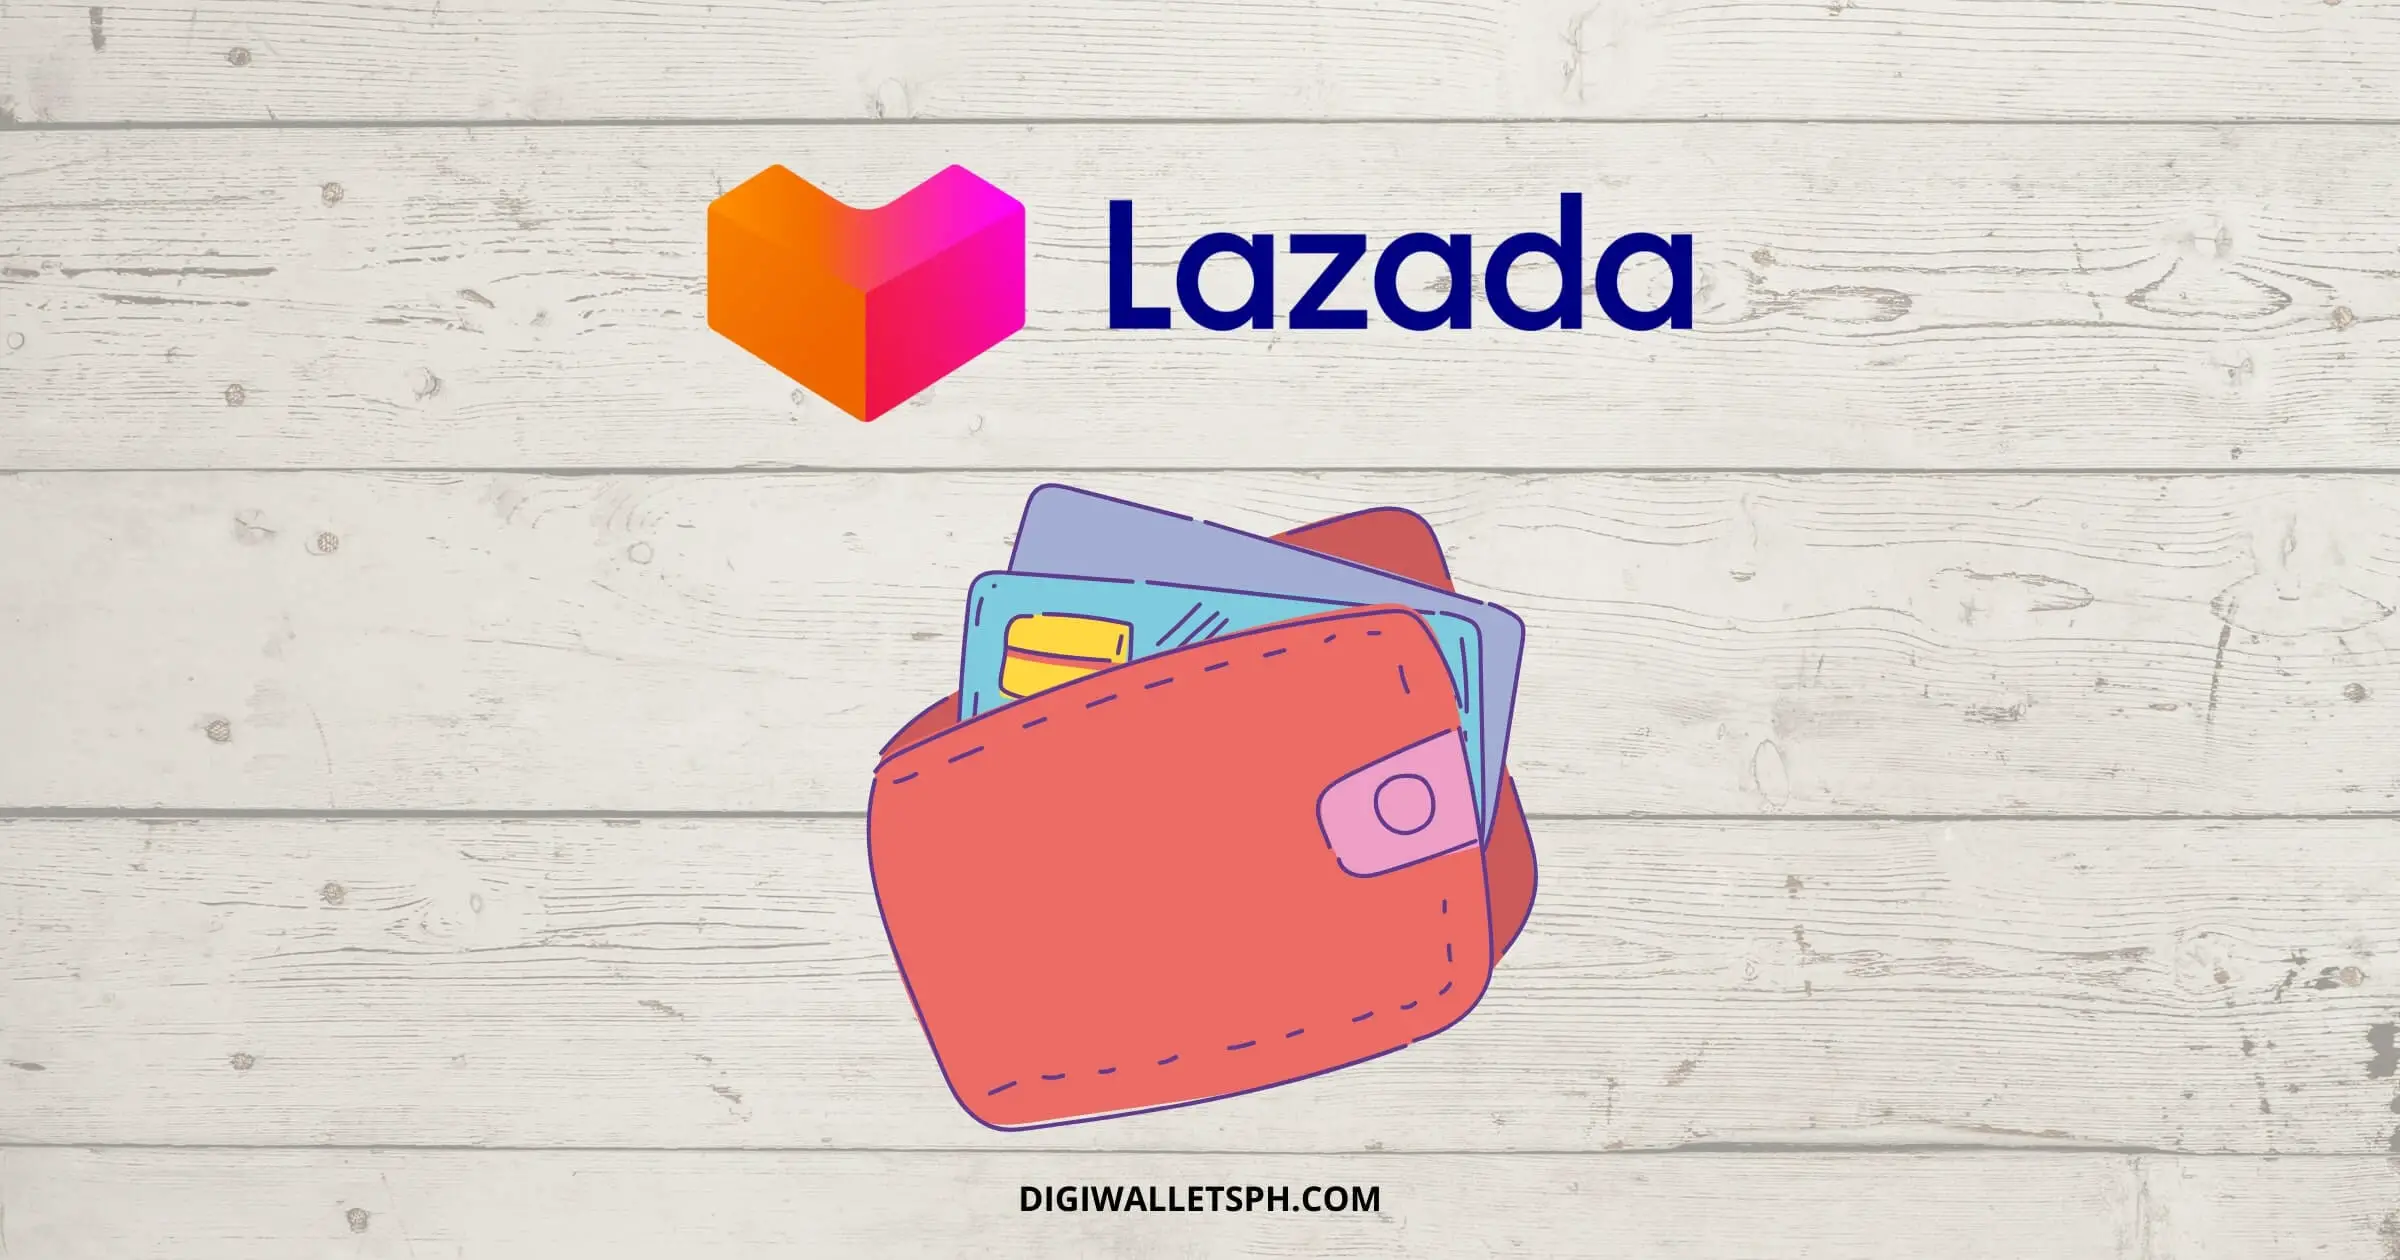 How to use Lazada wallet